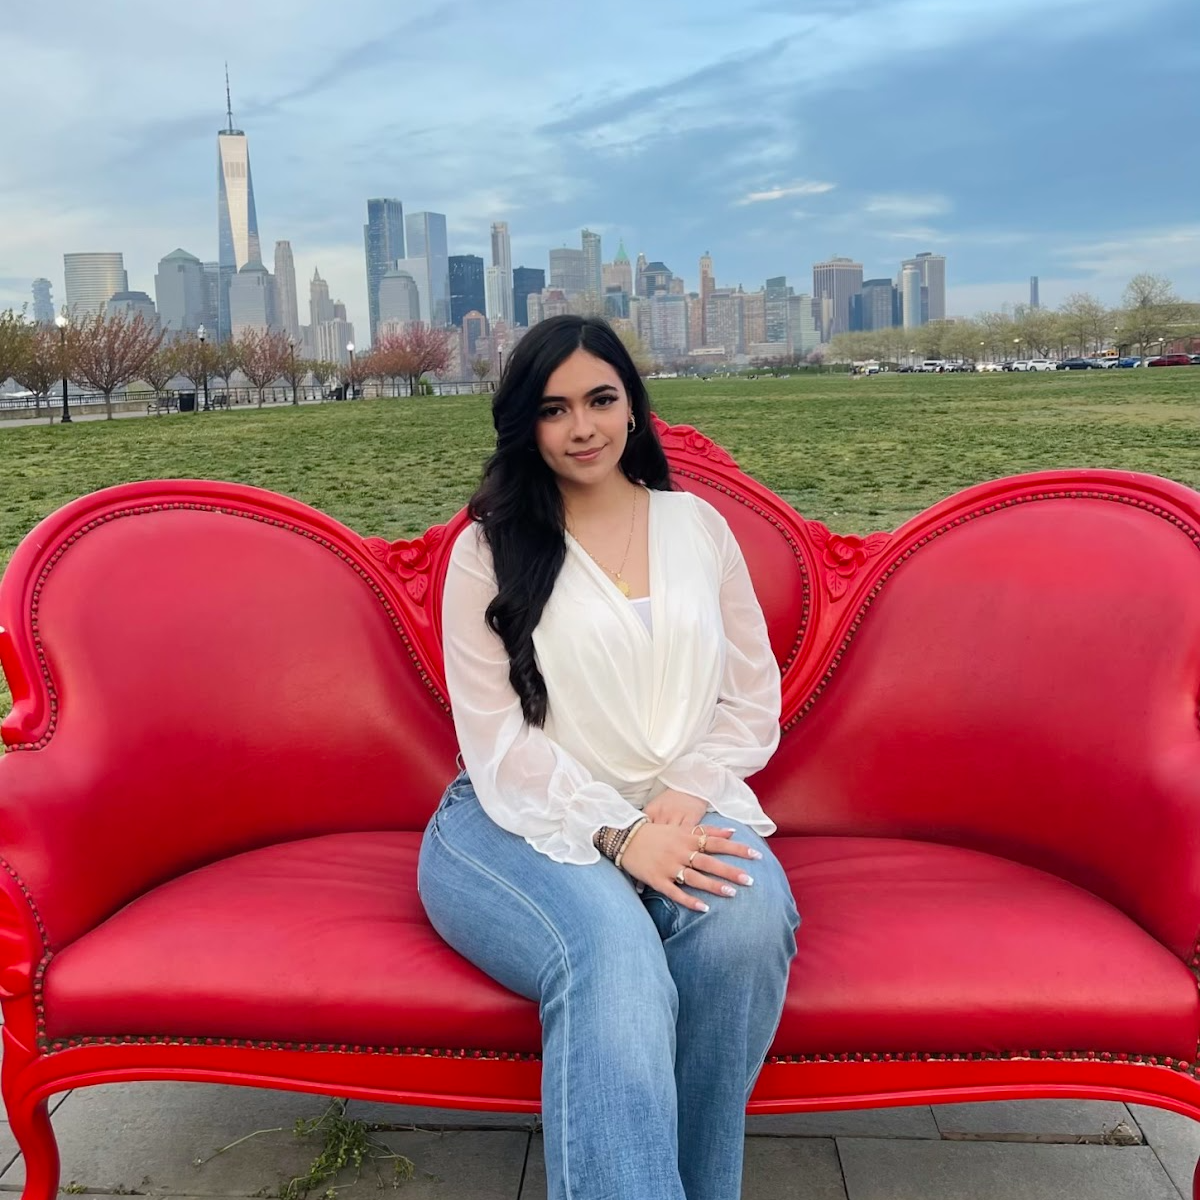 Cara Khalifeh sitting on a red bench in central park with the NYC skyline in the background.